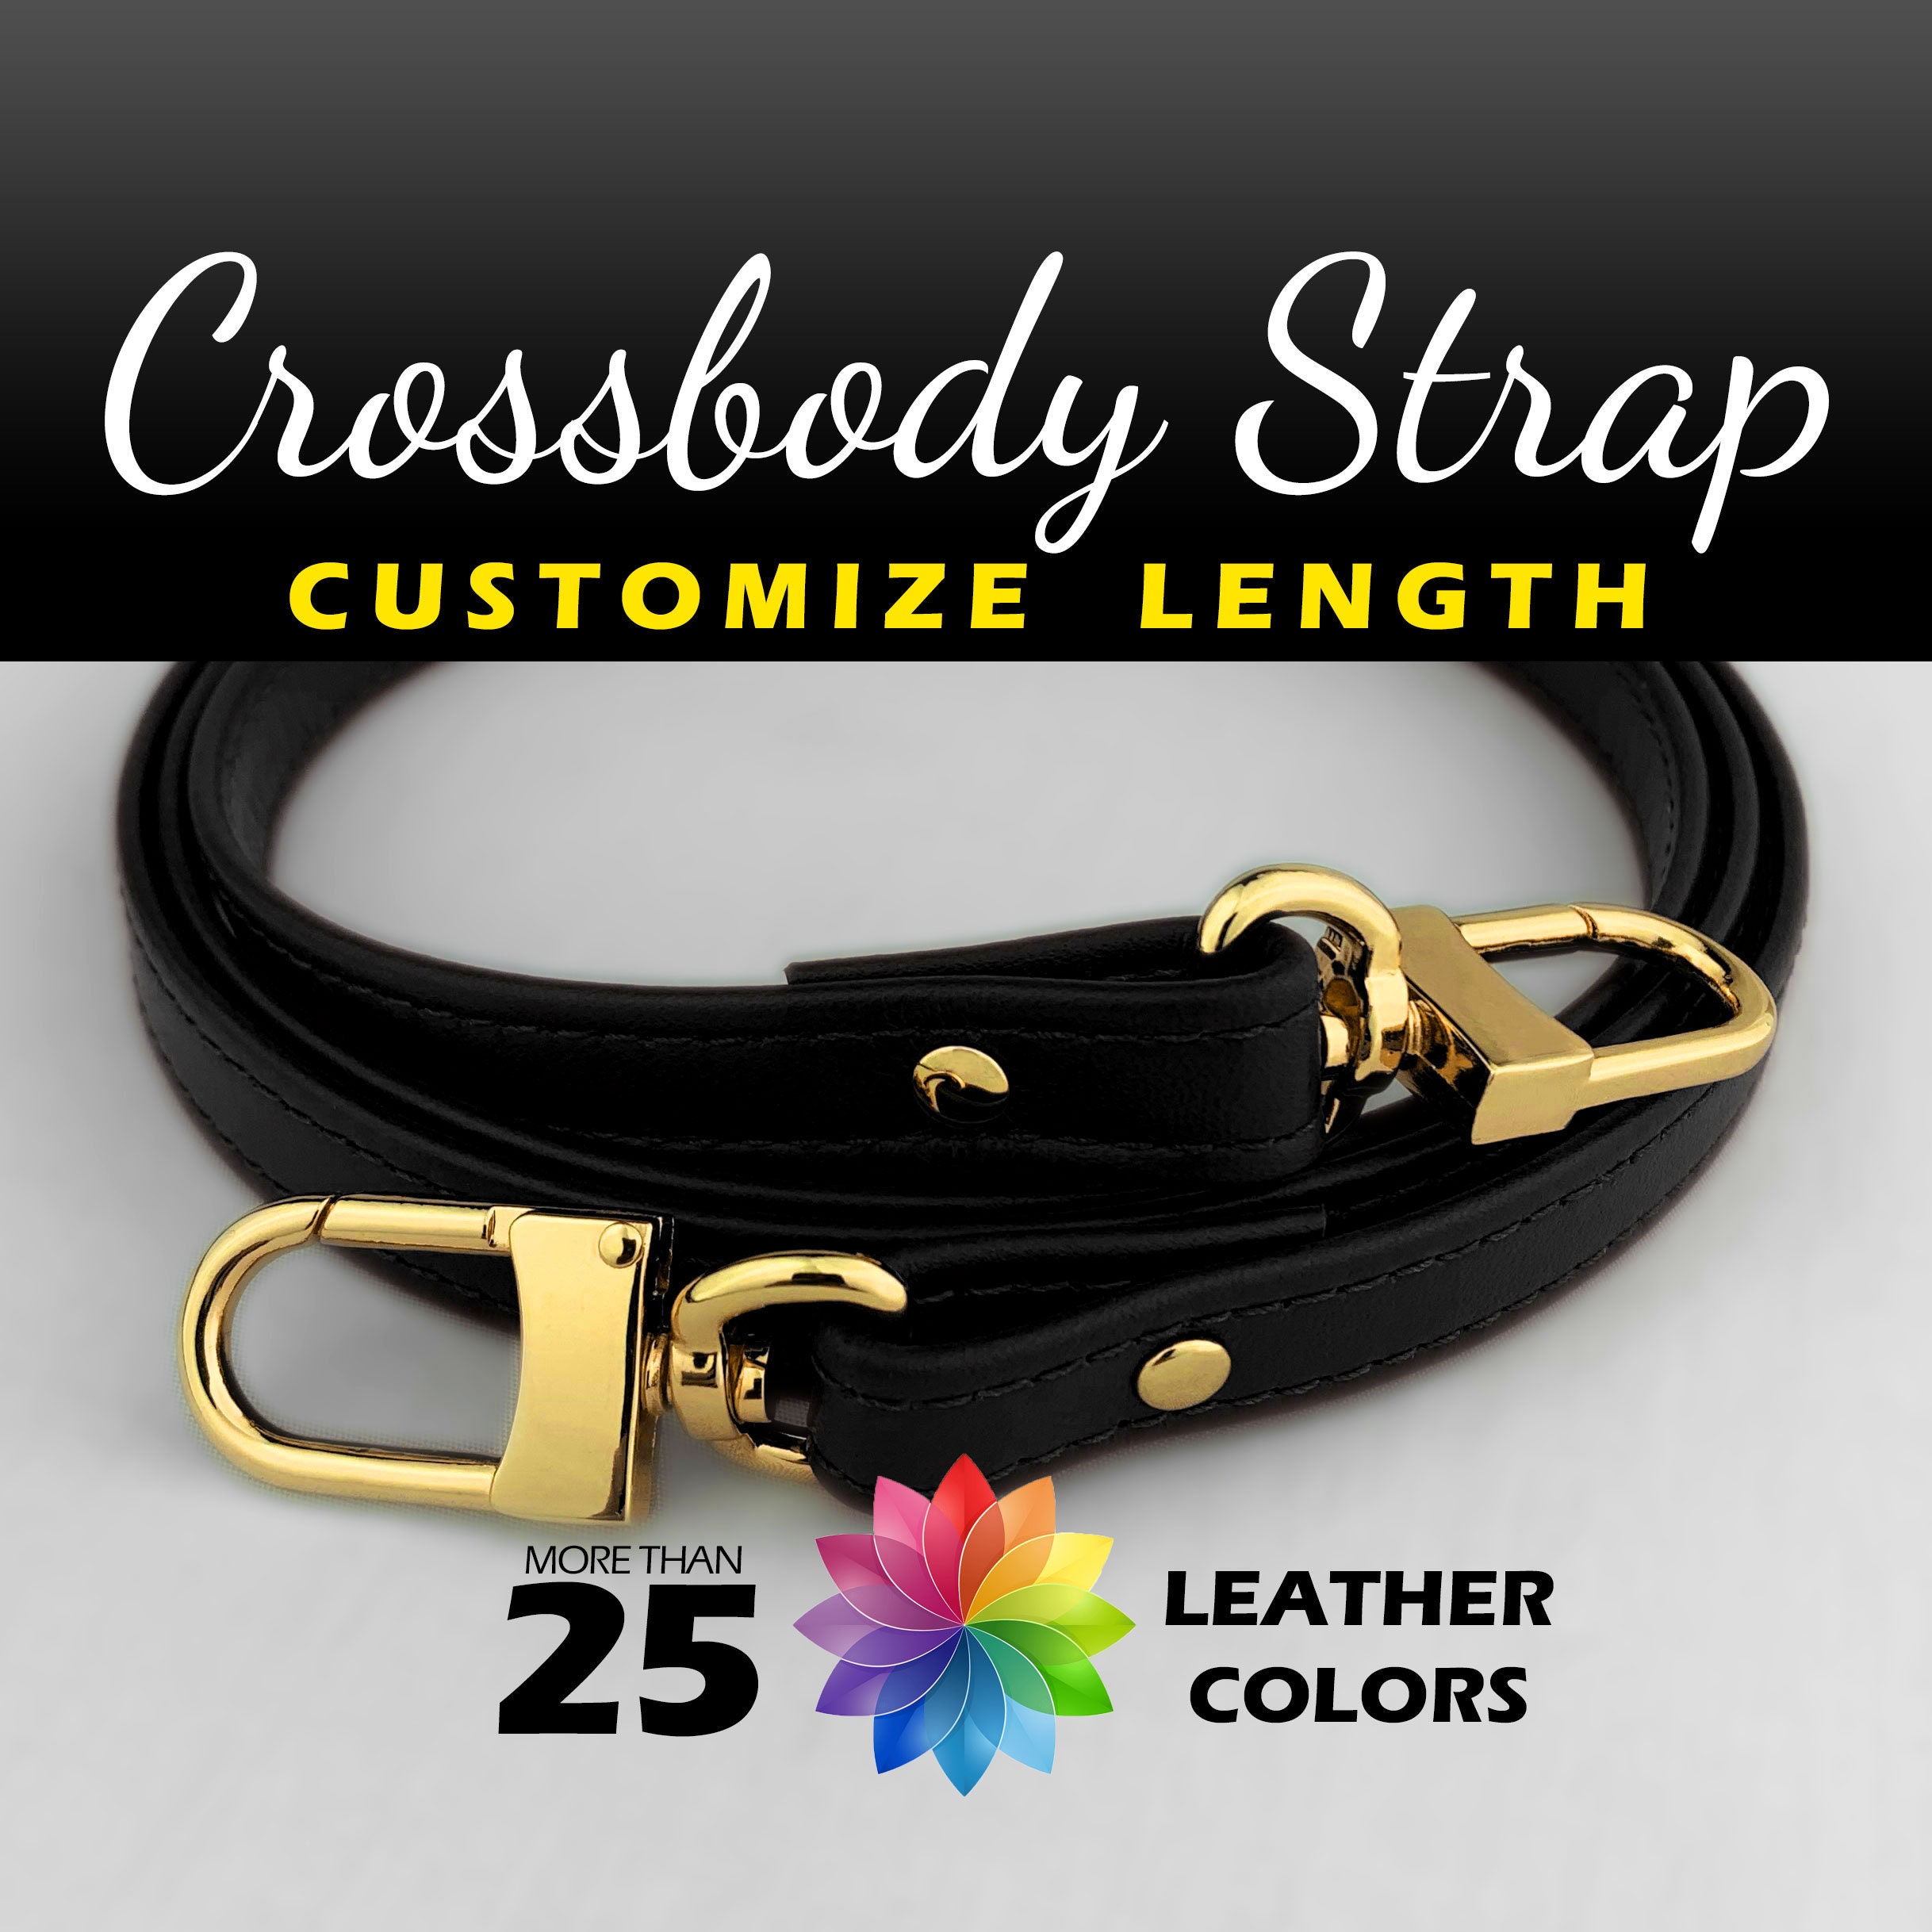 Crossbody Strap Replacement Dark Brown Ebene Real Leather Handcrafted  Crossbody Strap for Pochette Clutch and Small Luxury Purses 